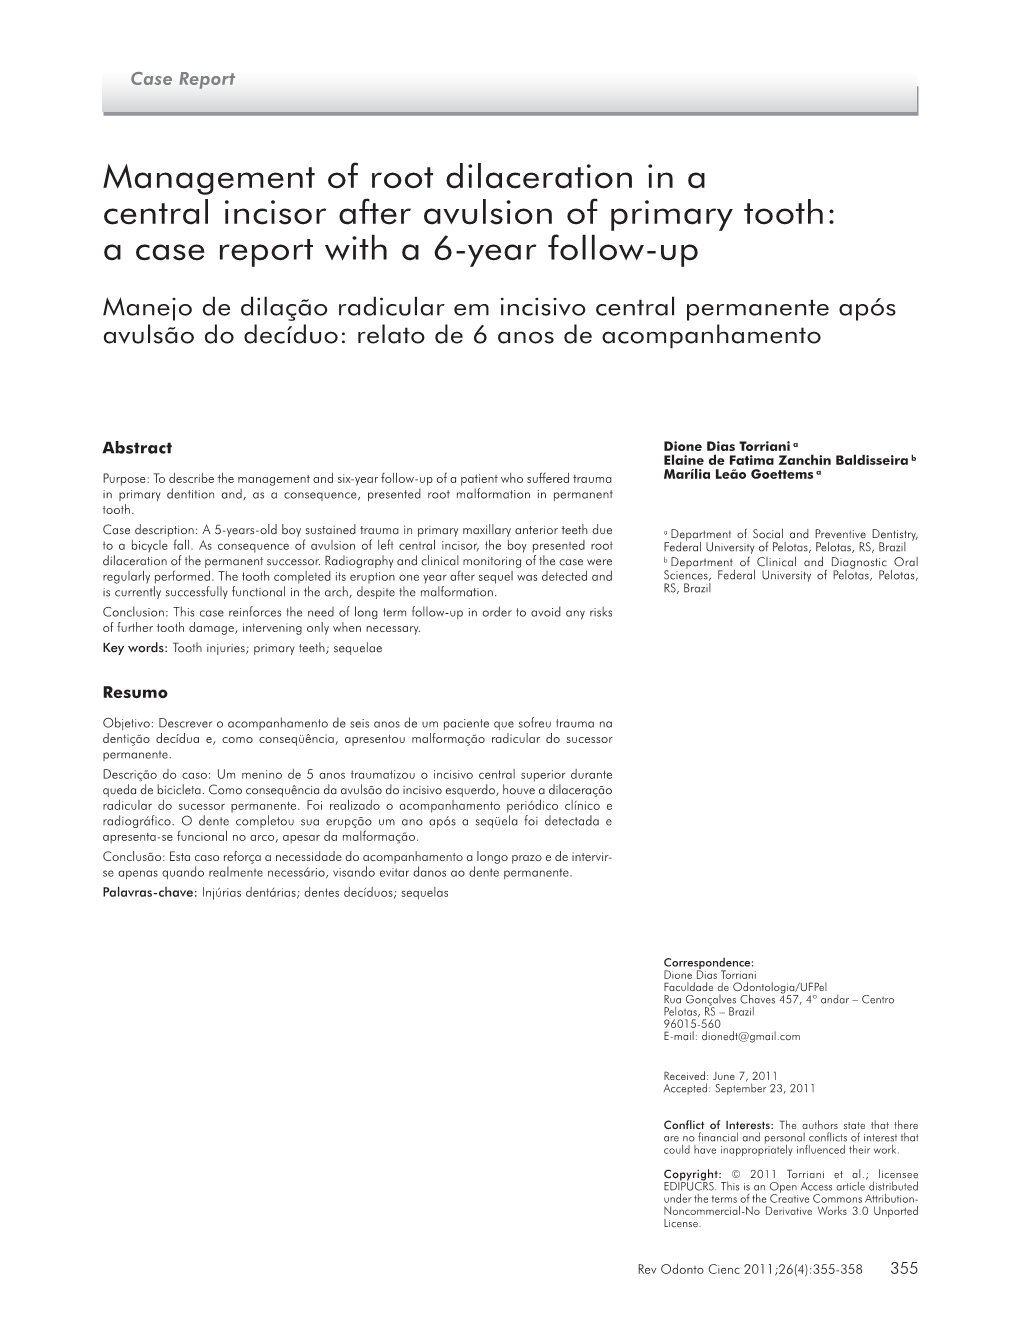 Management of Root Dilaceration in a Central Incisor After Avulsion of Primary Tooth: a Case Report with a 6-Year Follow-Up